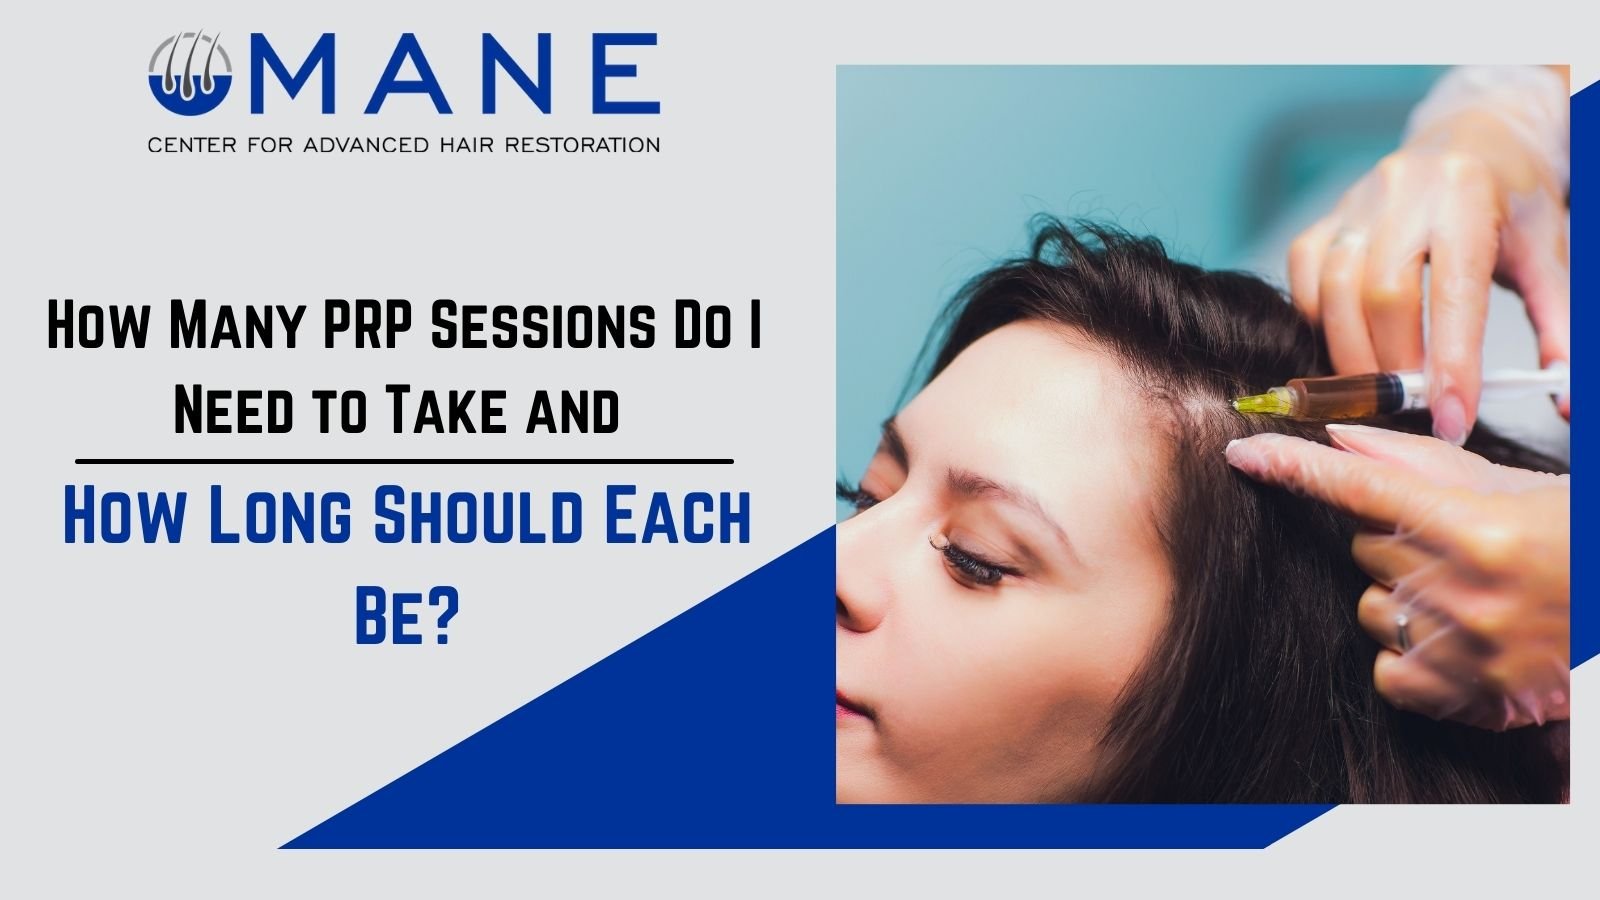 How Many PRP Sessions Do I Need to Take and How Long Should Each Be?